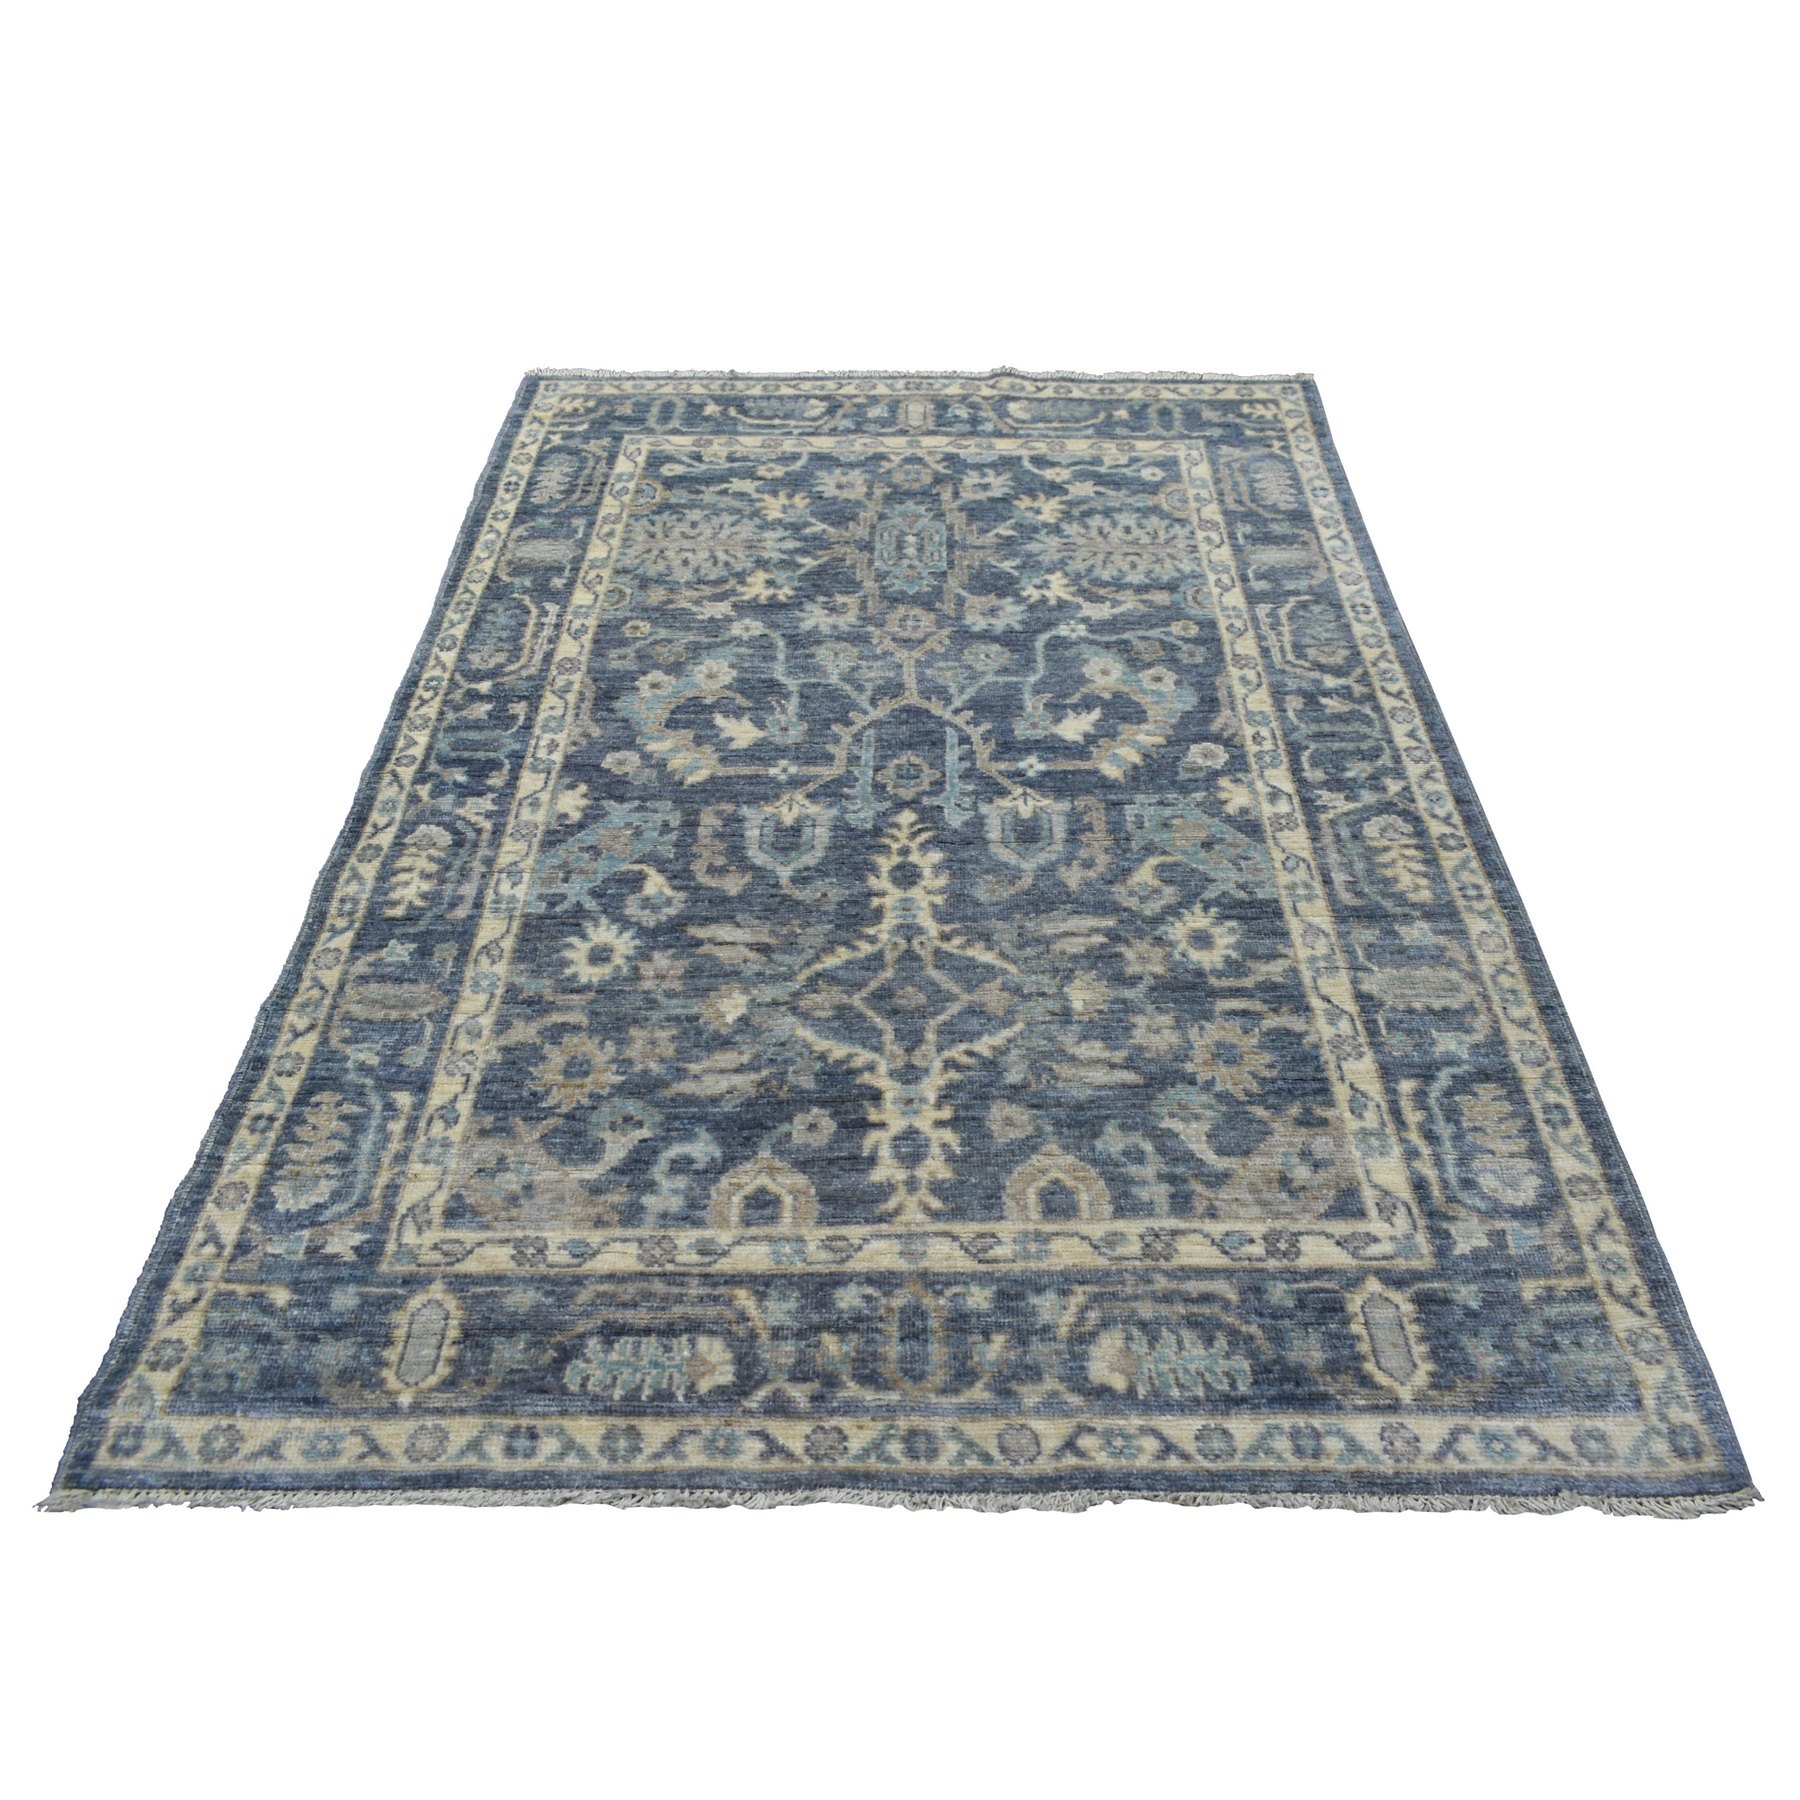 5'x7'4" Soft Wool Hand Woven Navy Blue Angora Oushak with Fresh Style and Plush Comfort Oriental Rug 